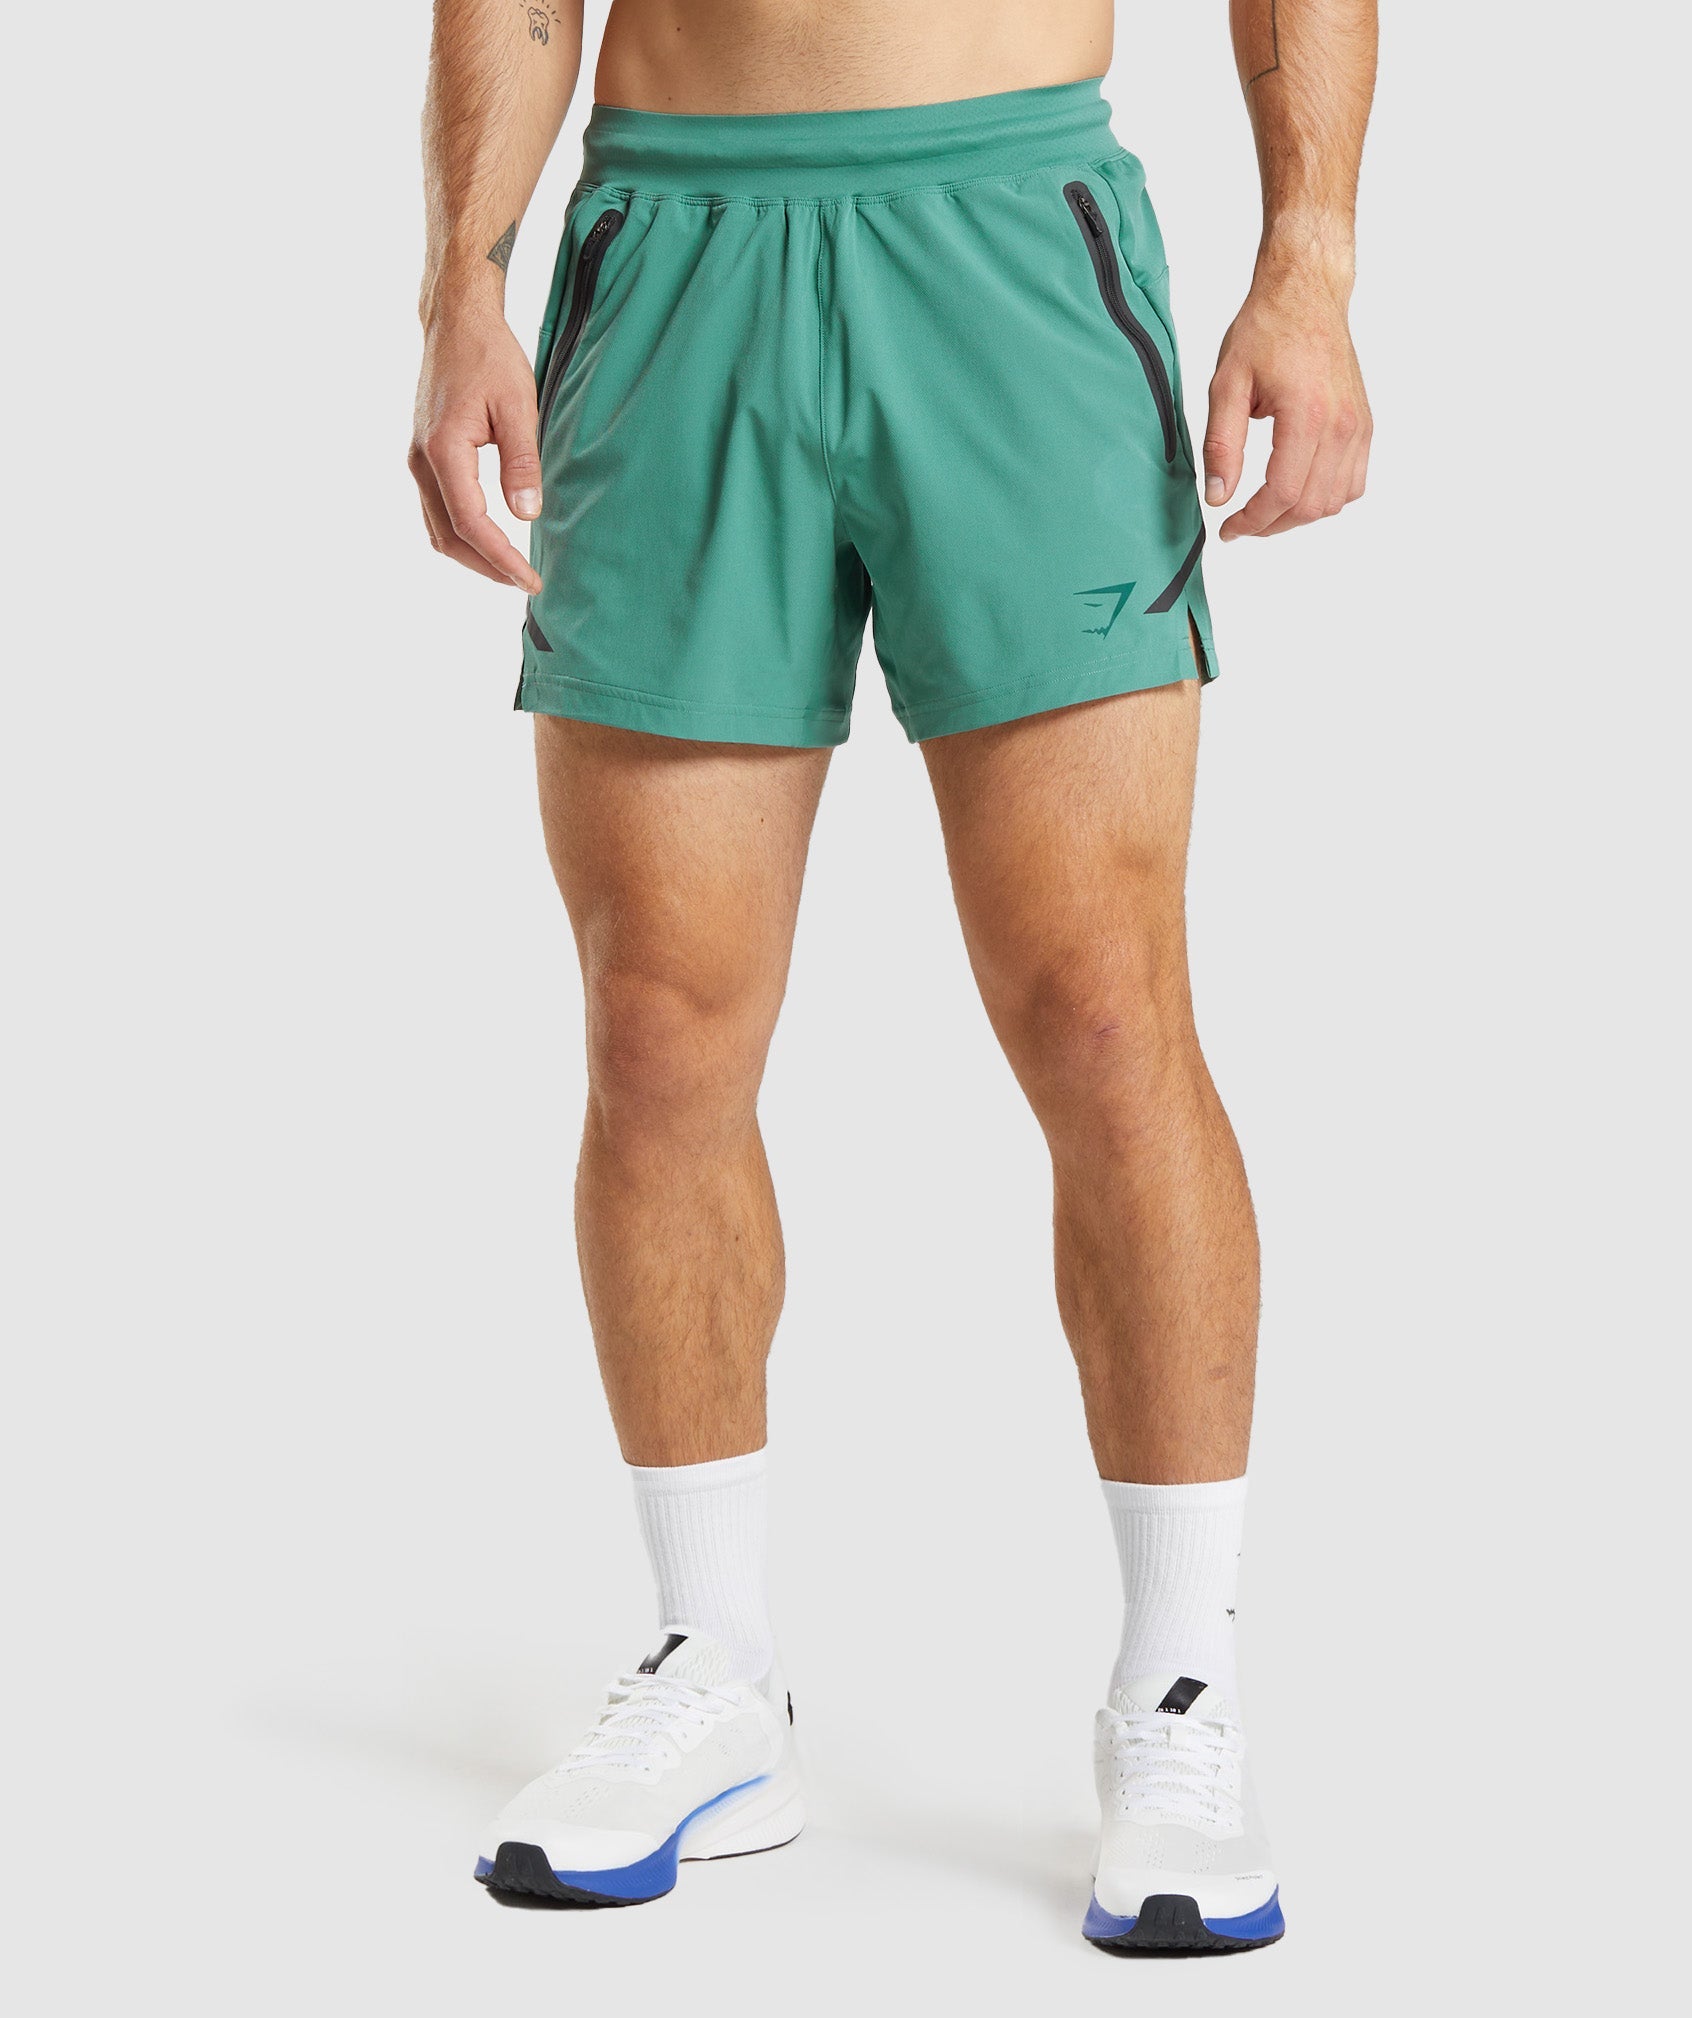 Apex 5" Perform Shorts in {{variantColor} is out of stock